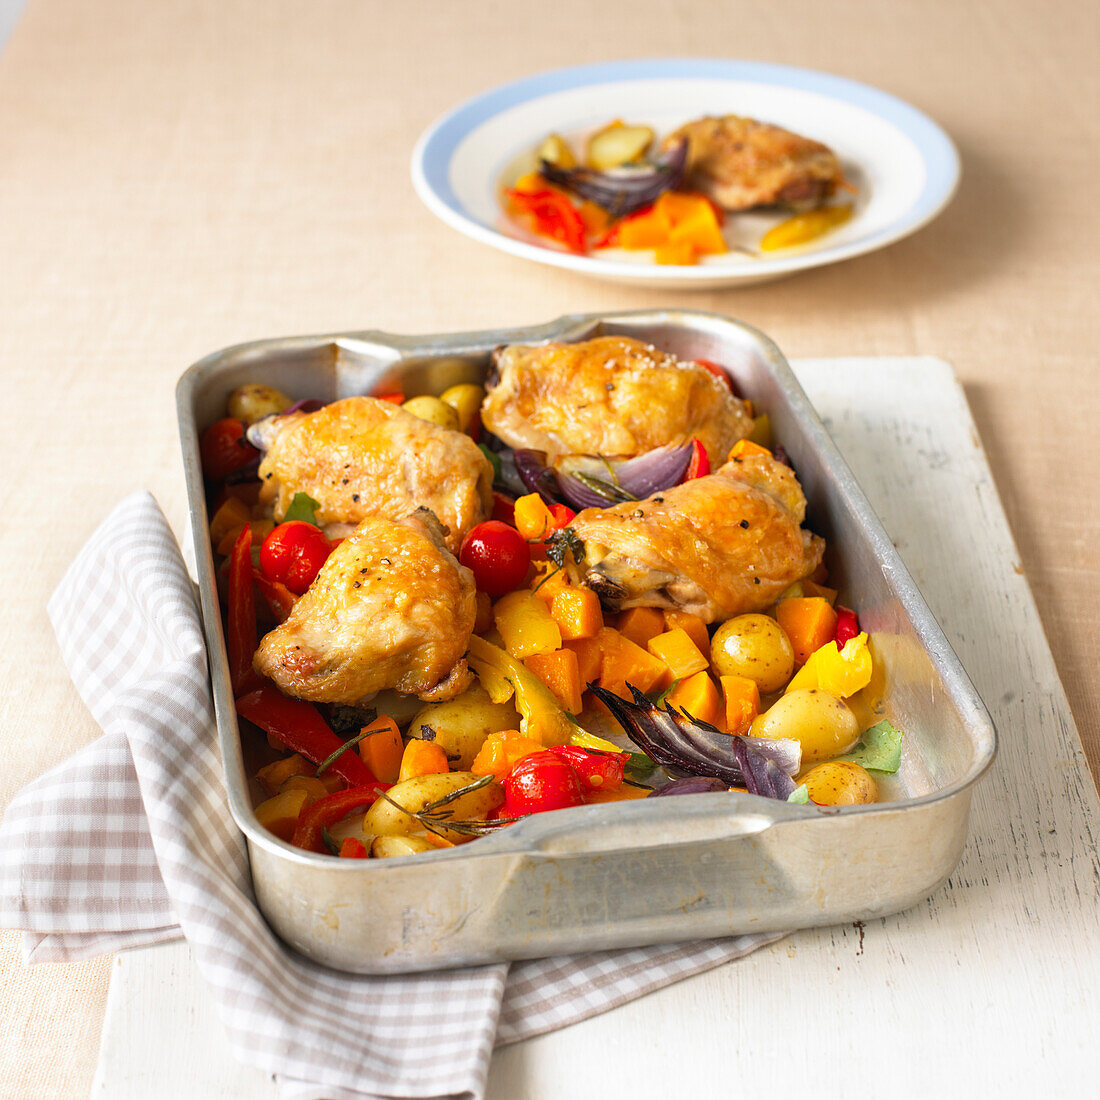 Italian braised chicken and vegetables